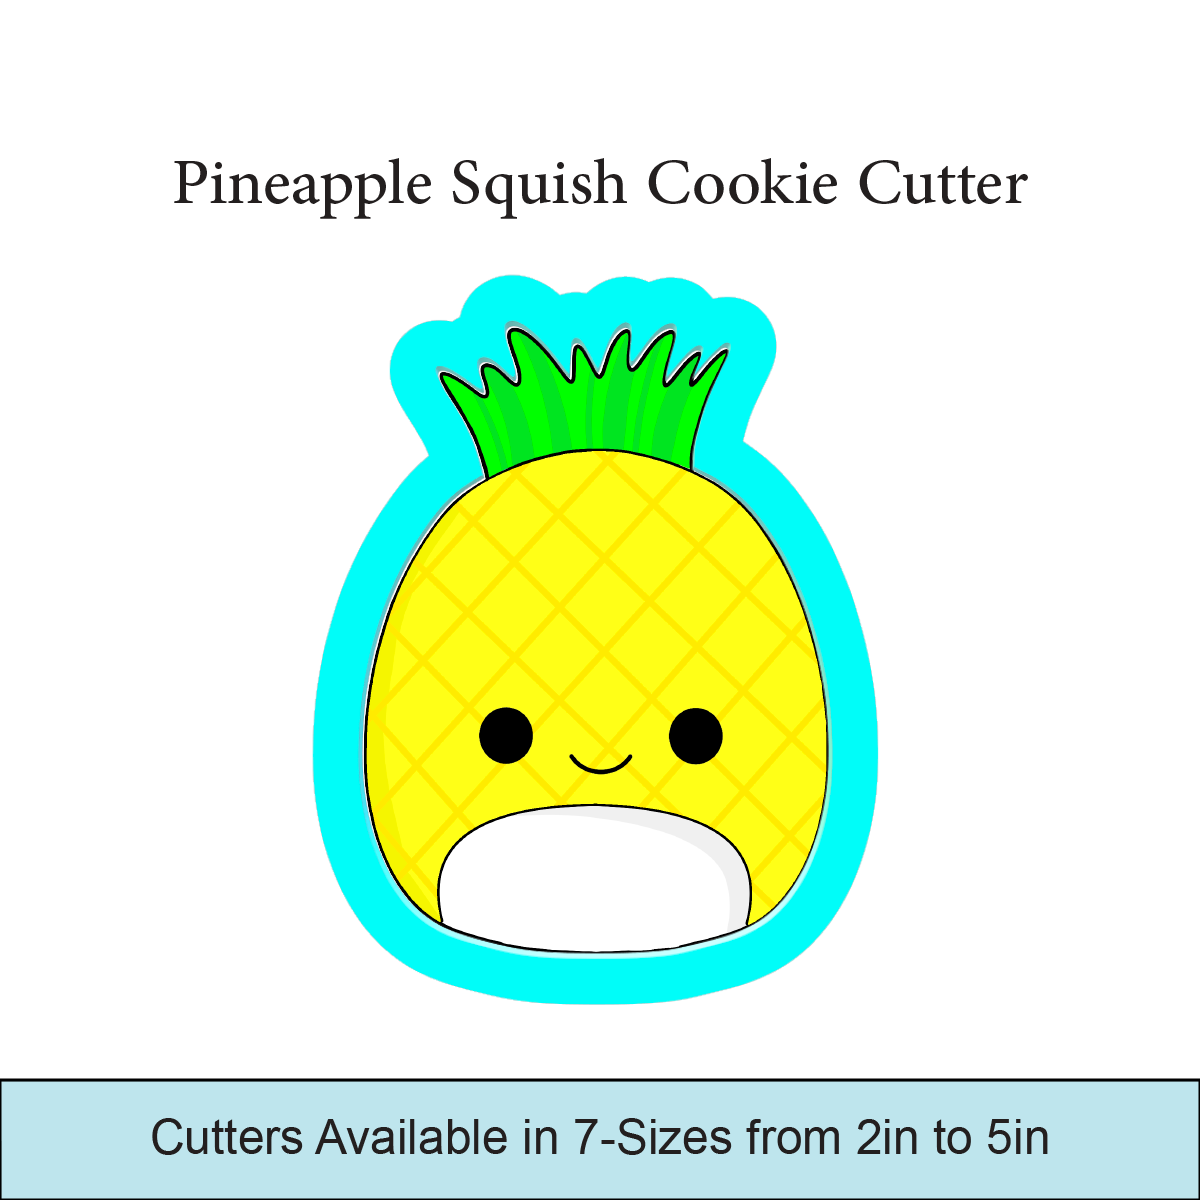 Pineapple Squish Cookie Cutters